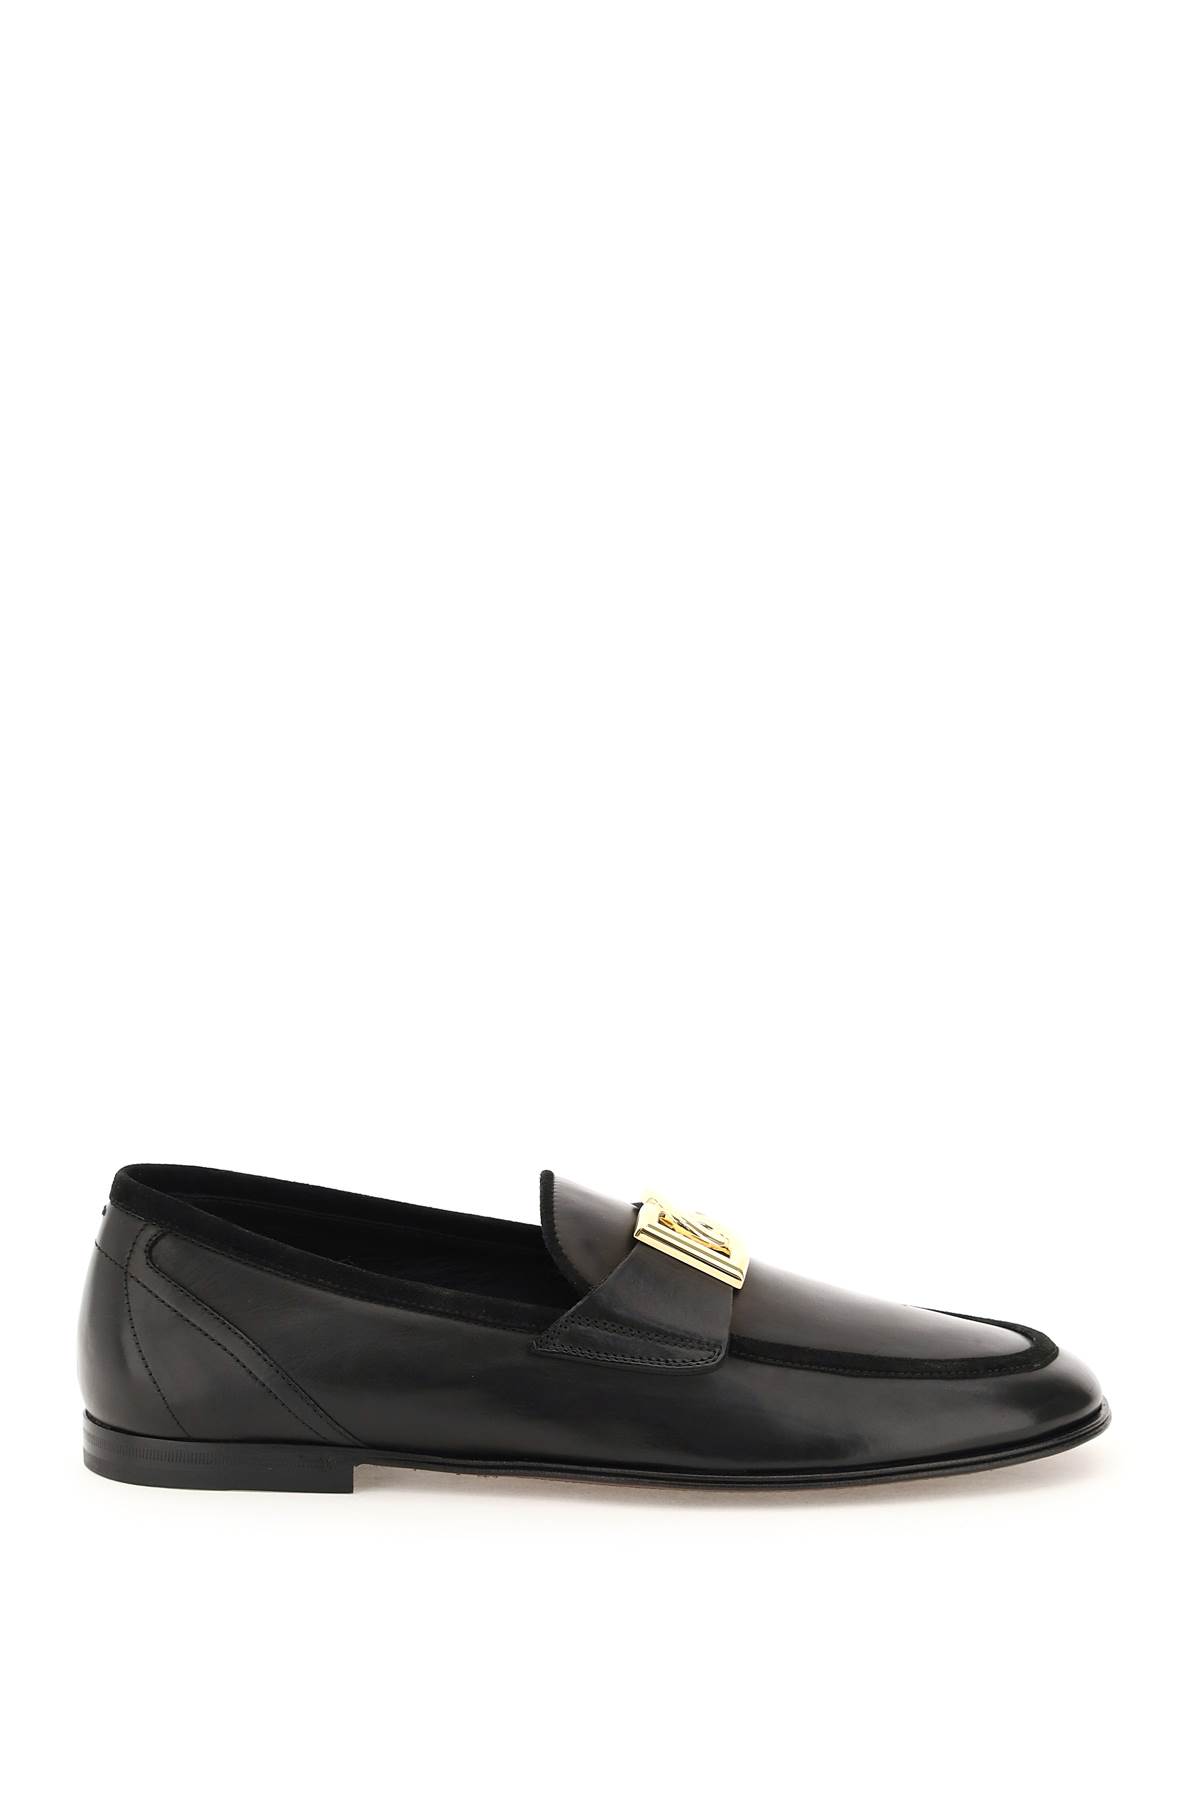 Shop Dolce & Gabbana Leather Ariosto Slippers Loafers In Nero